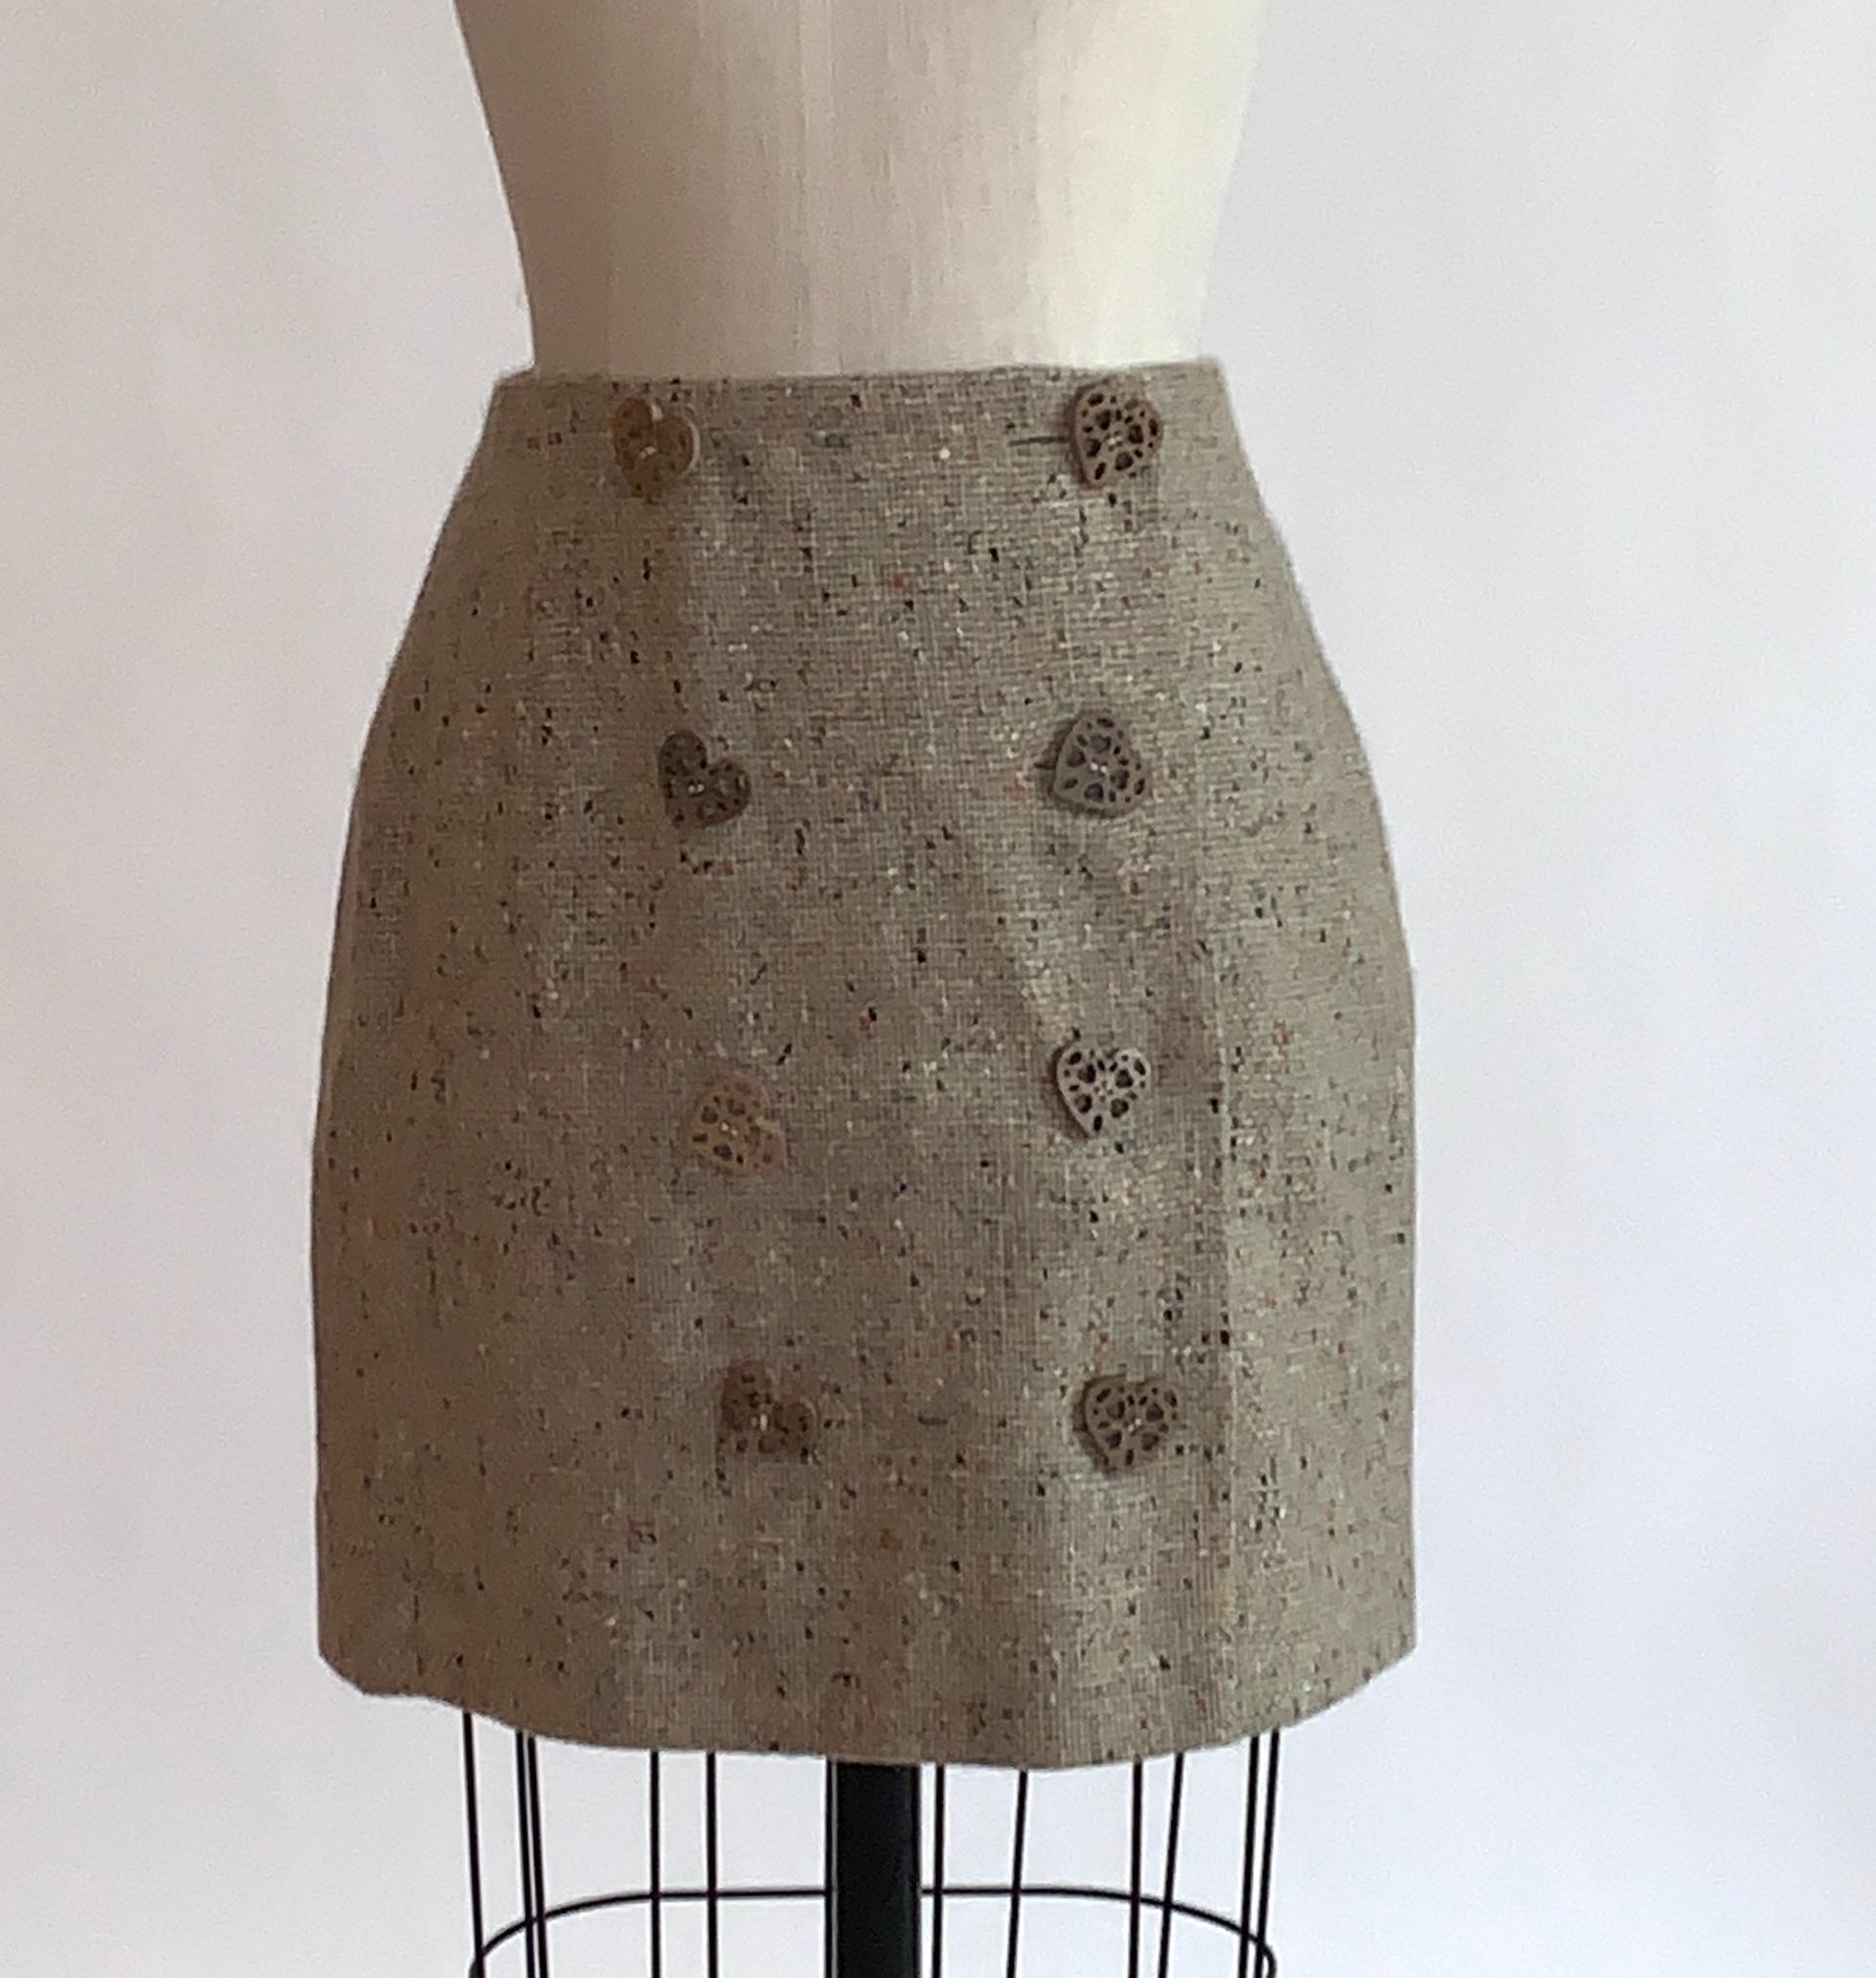 Women's New Moschino Cheap & Chic 1990s Oatmeal Tweed Skirt Suit with Heart Buttons